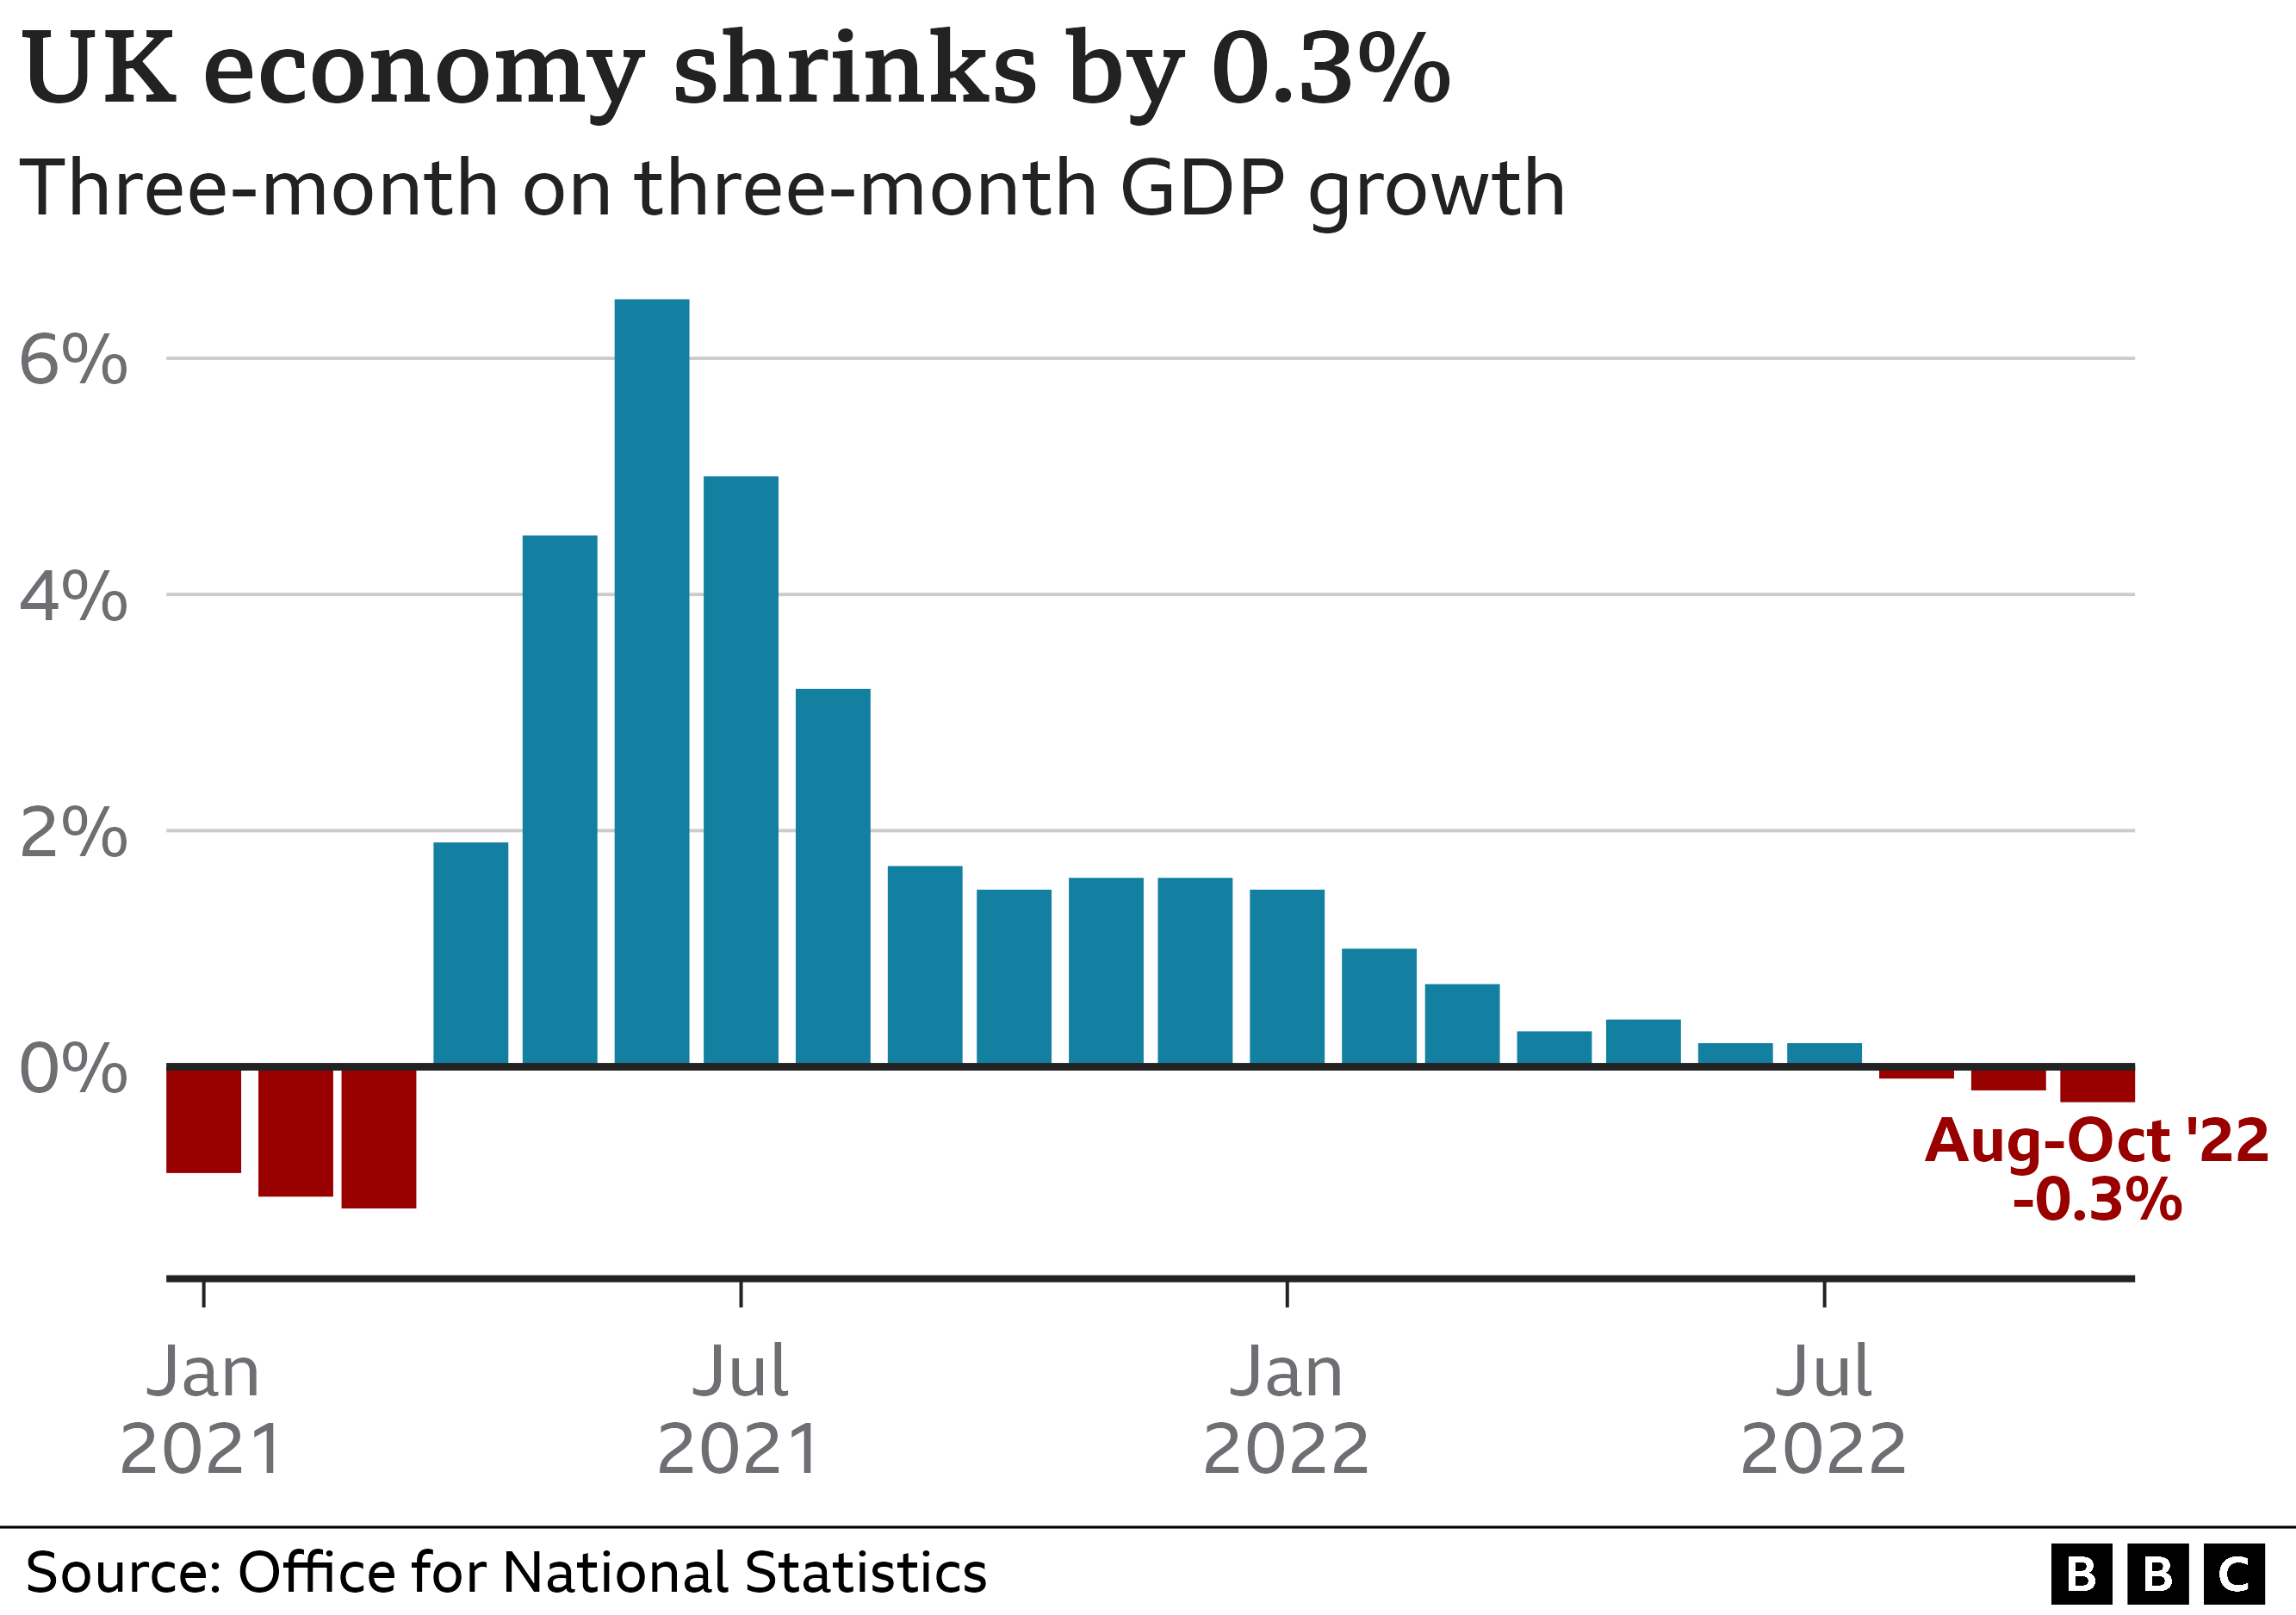 GDP graphic